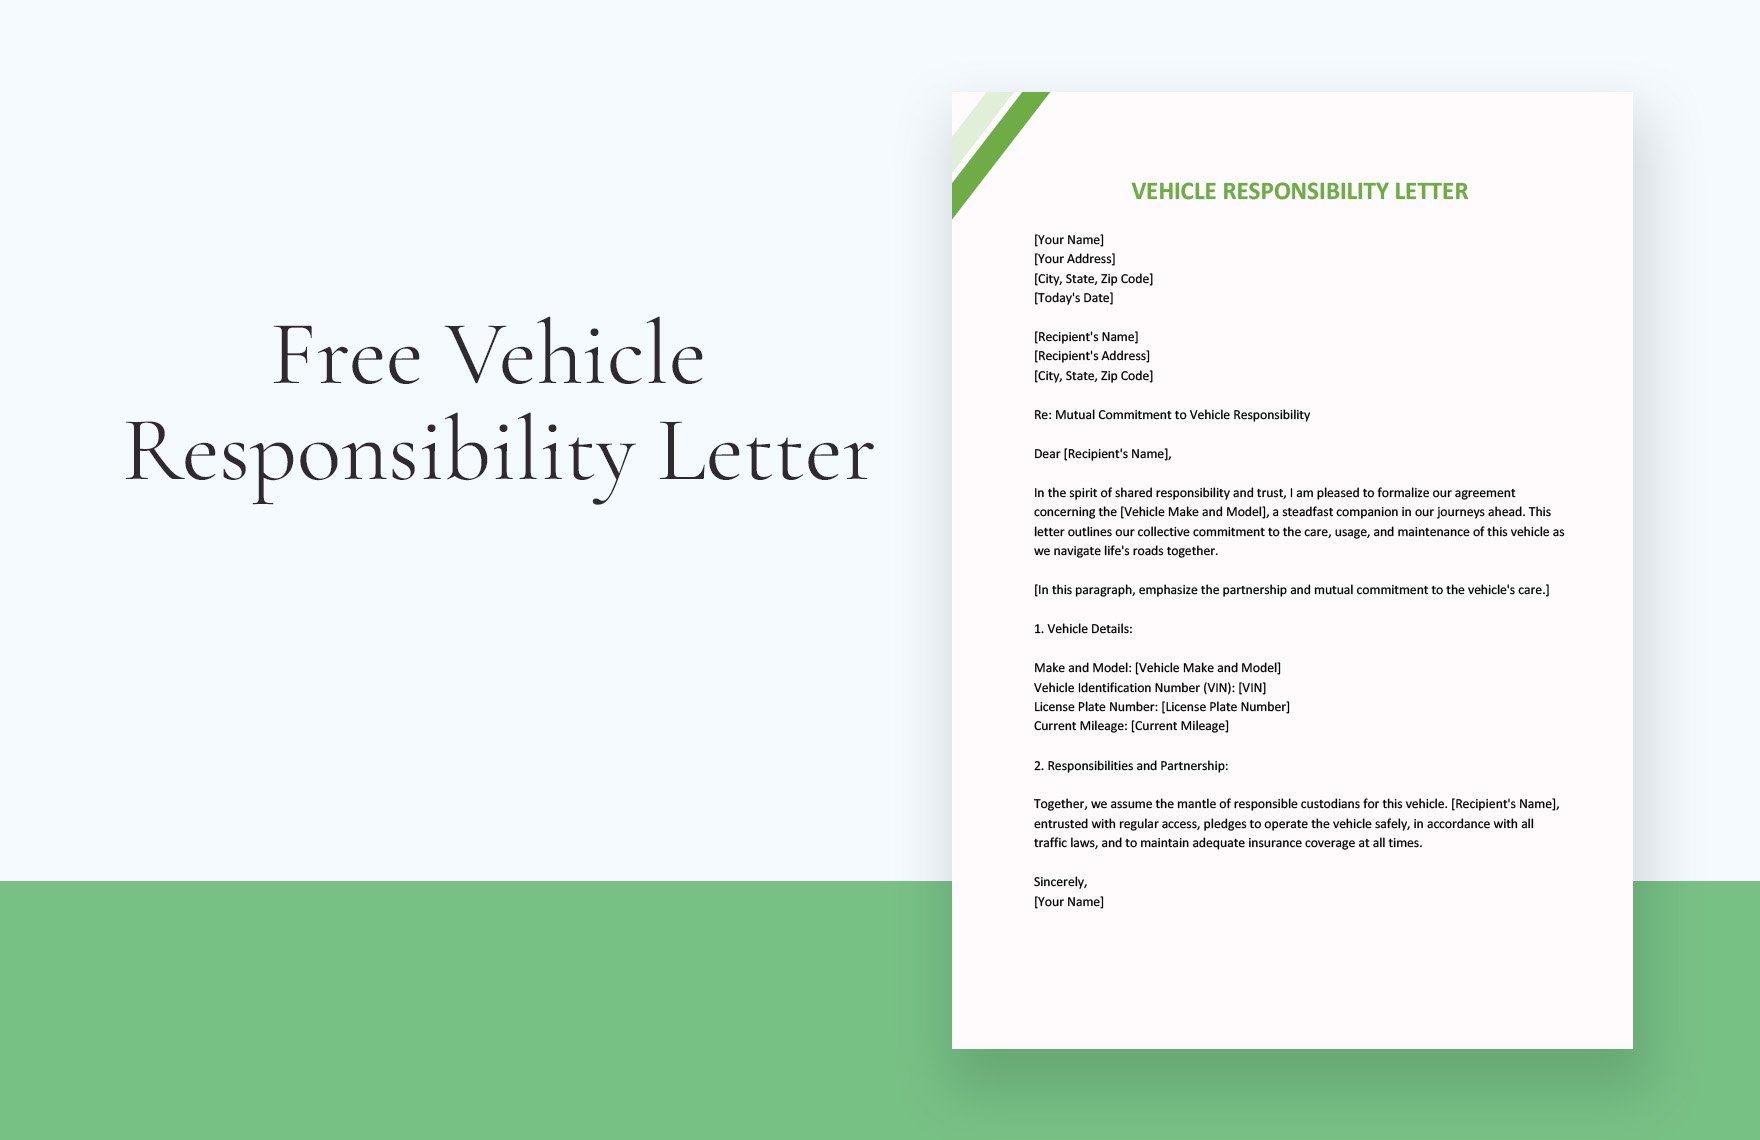 Vehicle Responsibility Letter